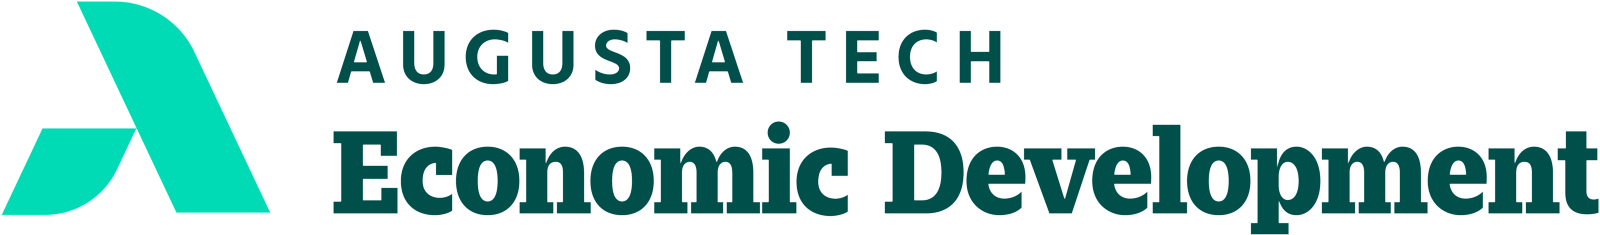 An uppercase abstract A in mint green composed of a smaller leg representing Augusta Technical College supporting the larger leg representing the Augusta Community and economy. The words Augusta Tech and School of Arts & Sciences are in heritage green font to the right of the a, stacked in three horizontal rows with School of Arts & Sciences in bold font.